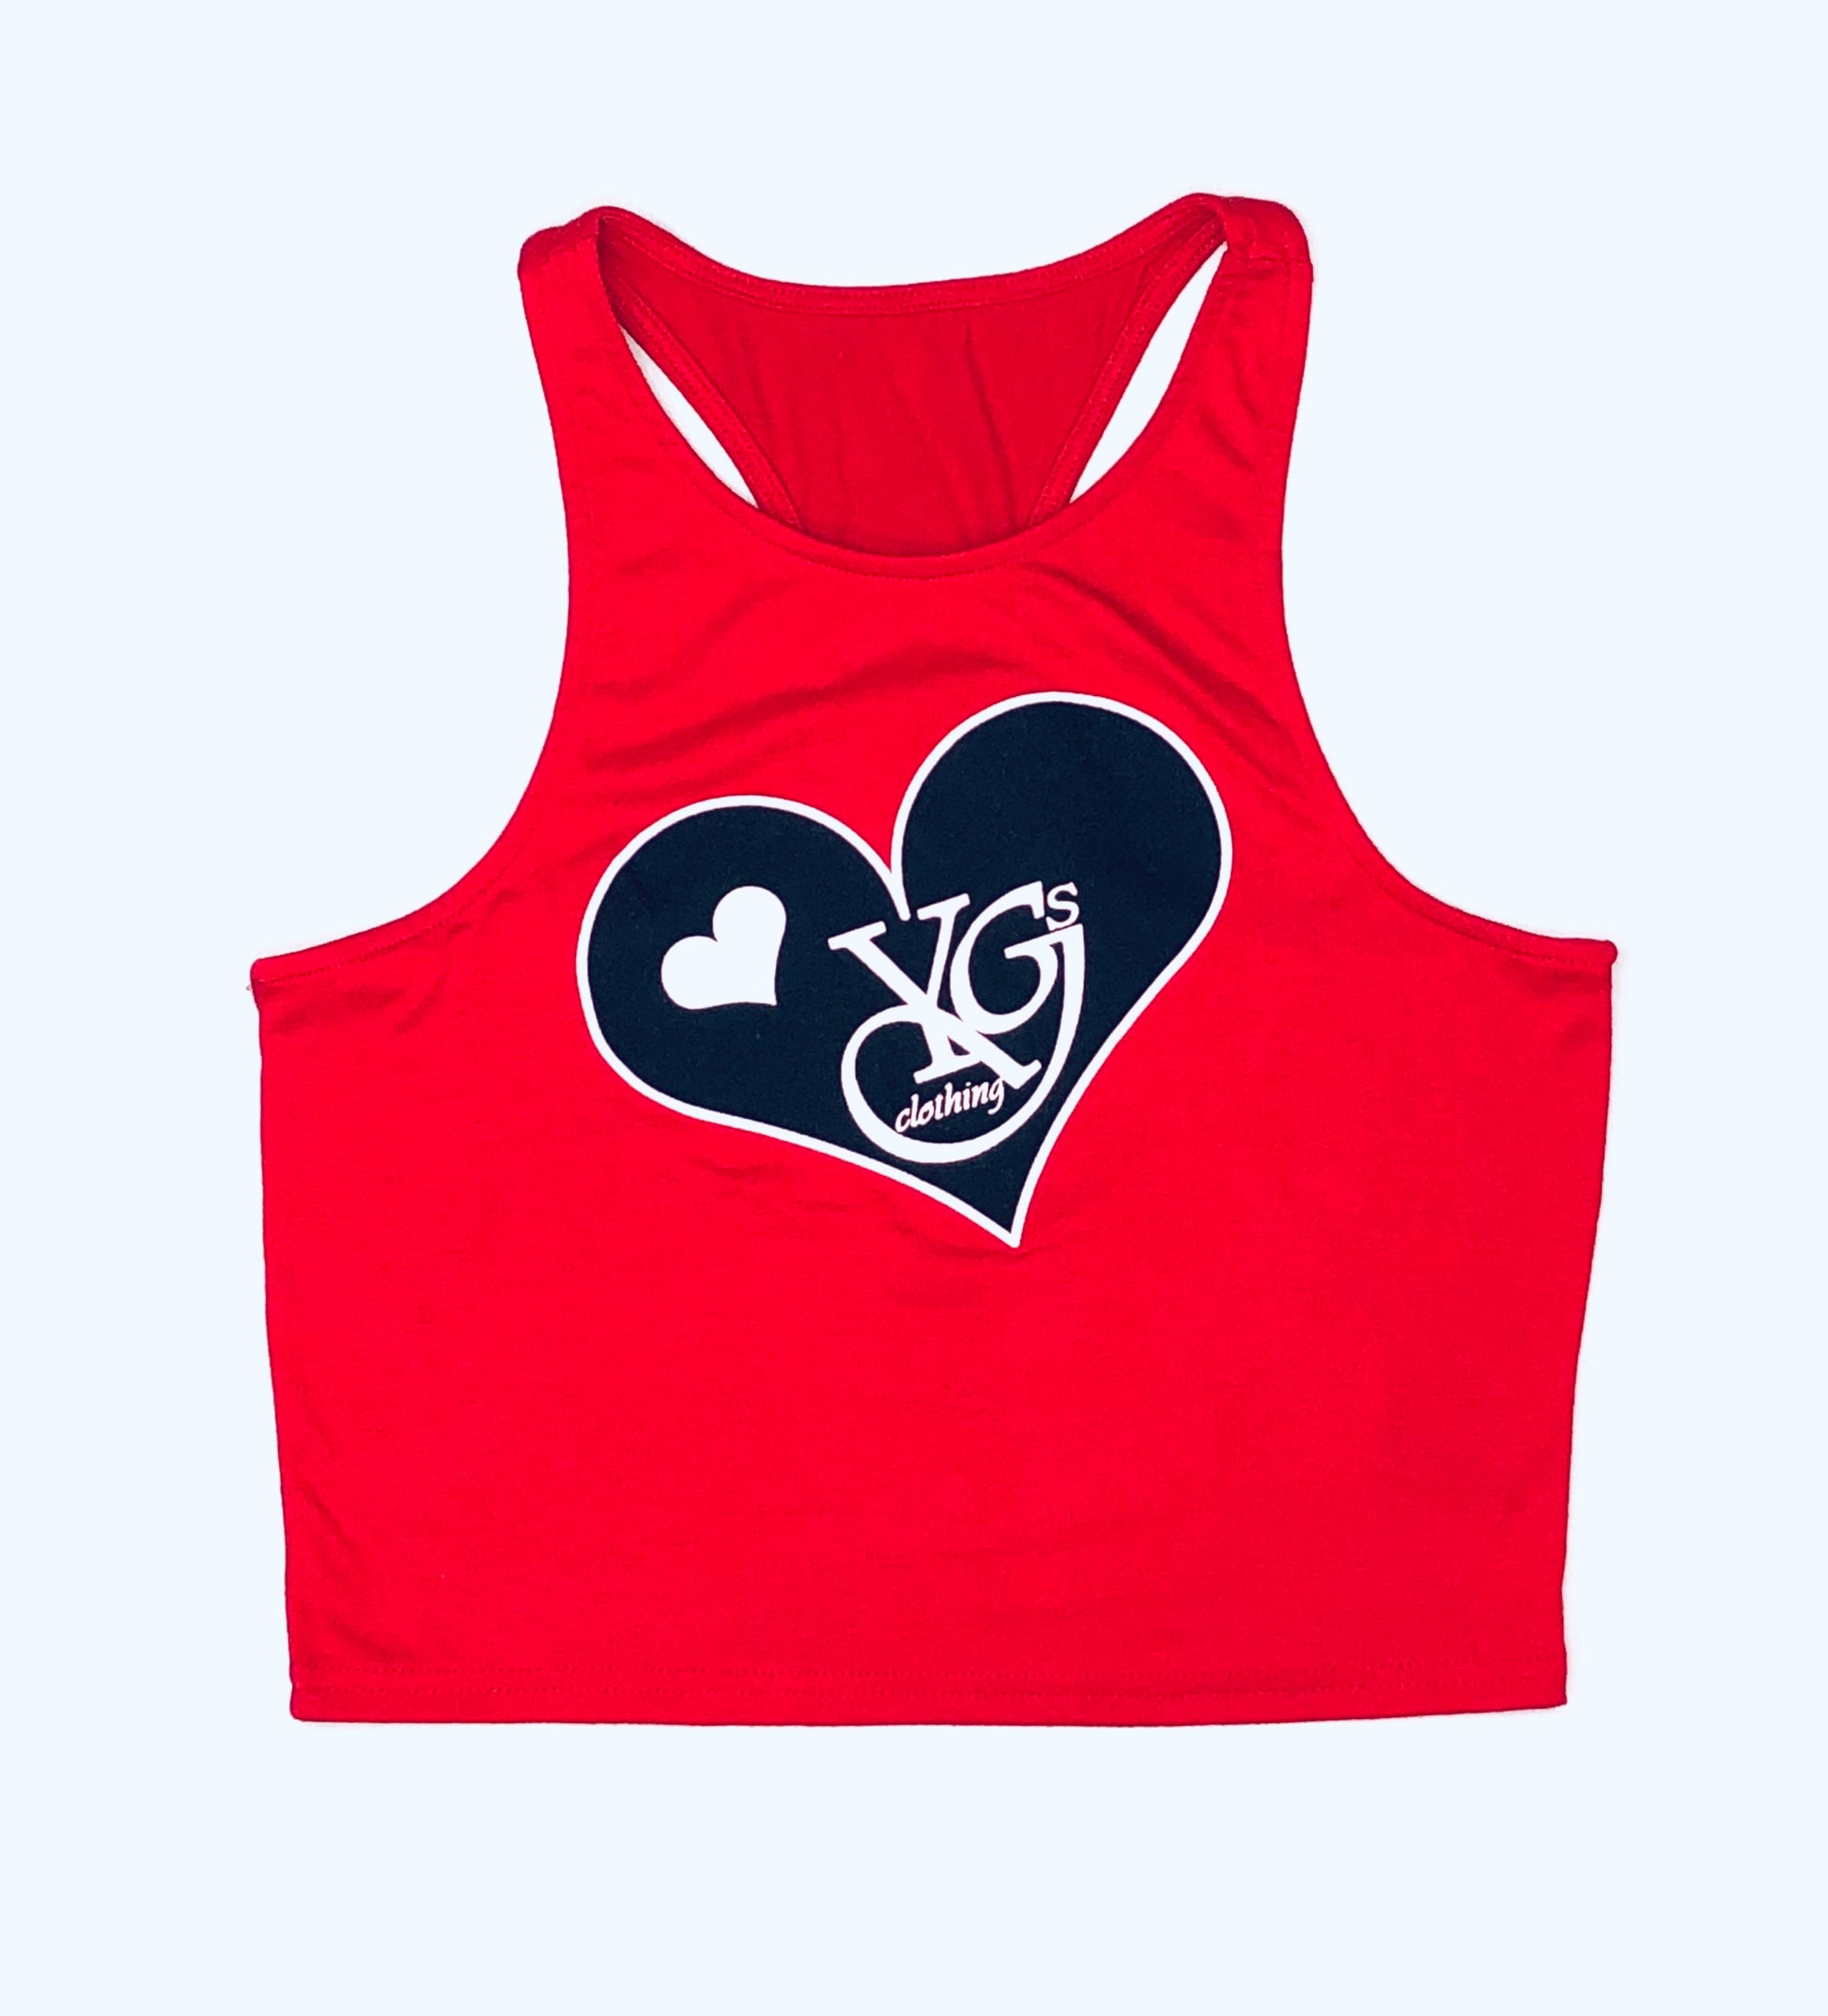 YGSC Heart Logo Crop-Top w/ Booty shorts - Young GS Clothing